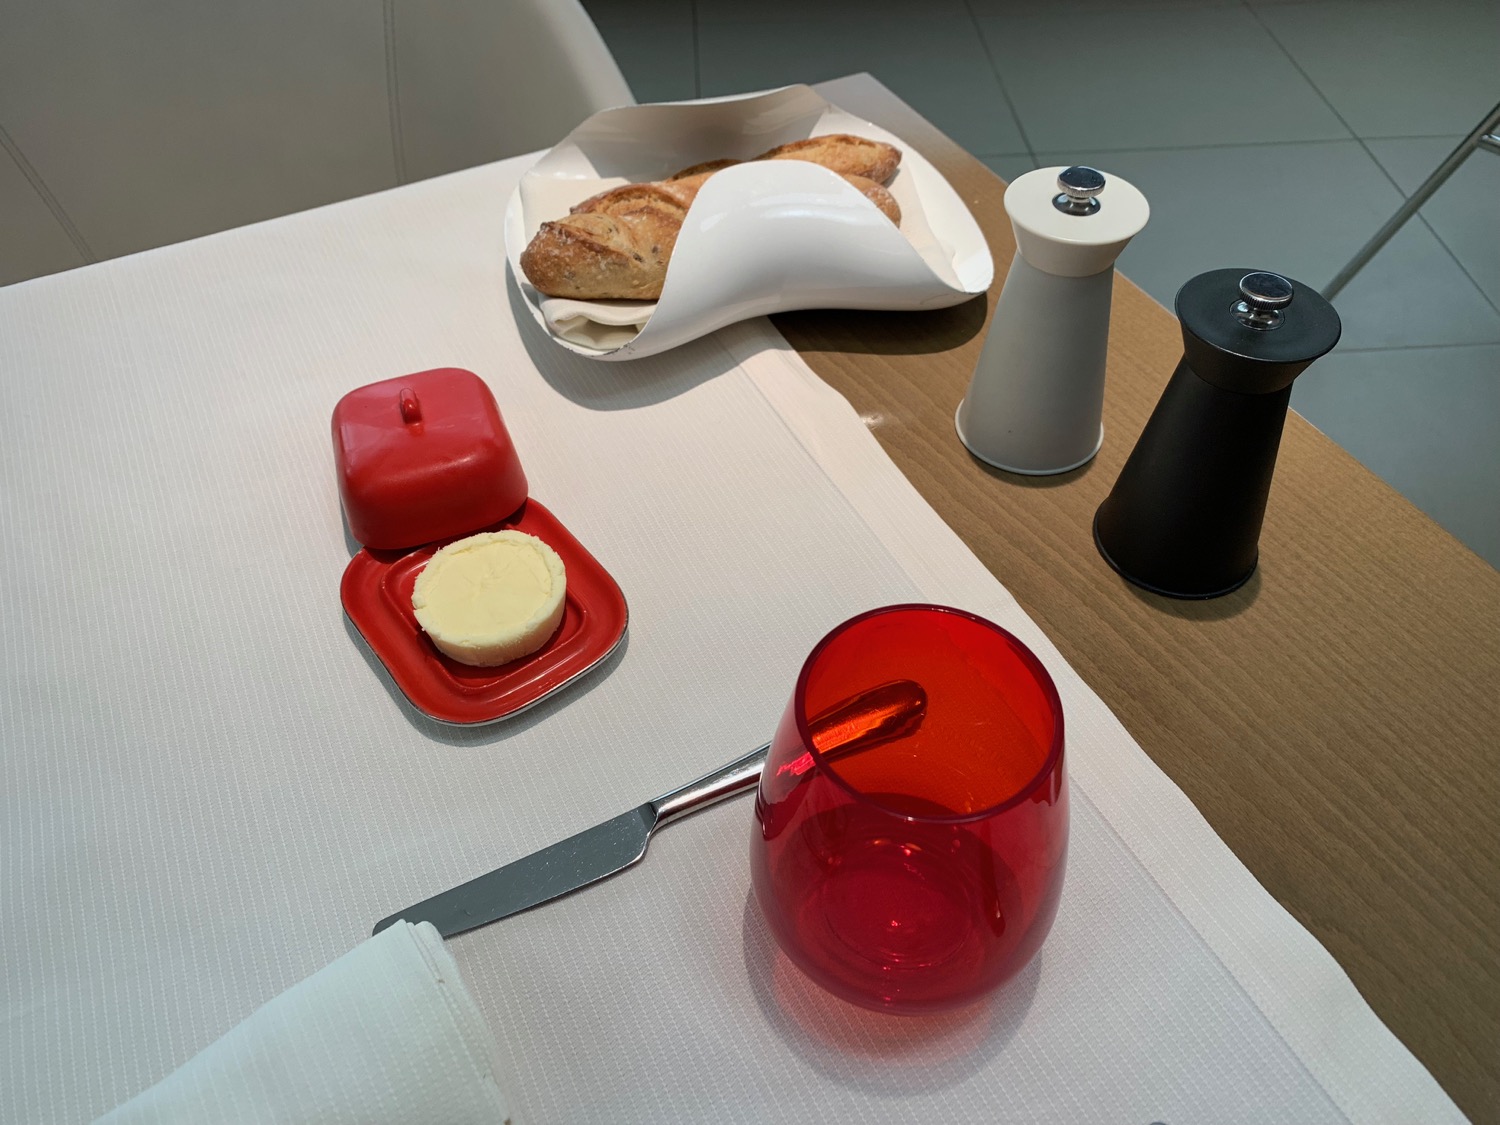 a table with a red container and a red glass on it